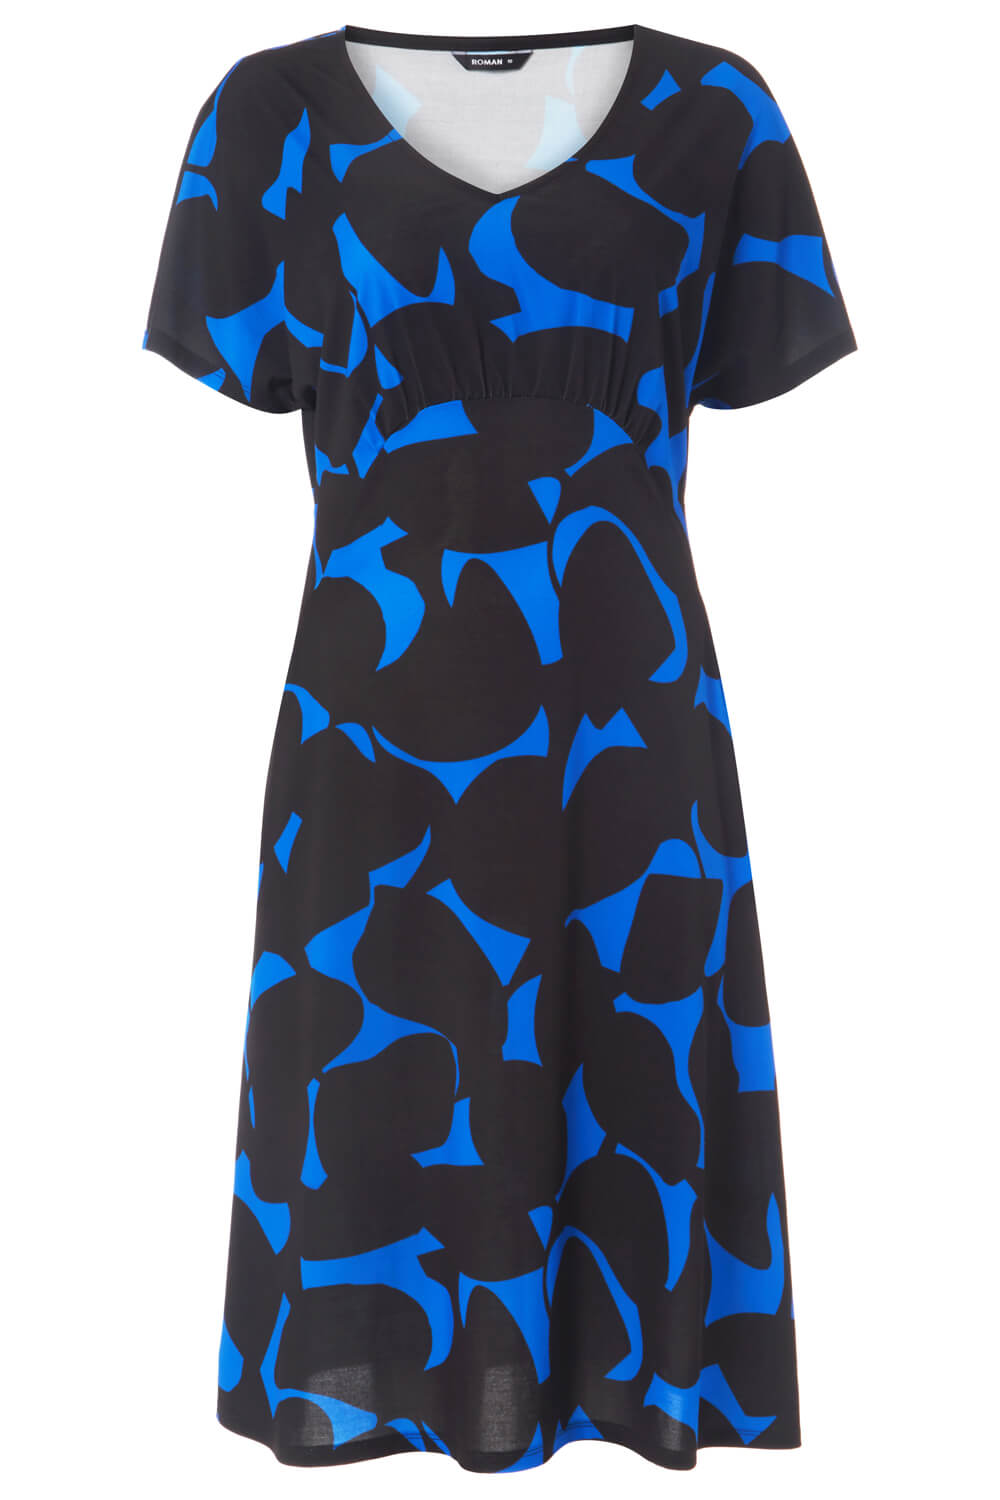 Royal Blue Abstract Leaf Print Gathered Dress, Image 5 of 5